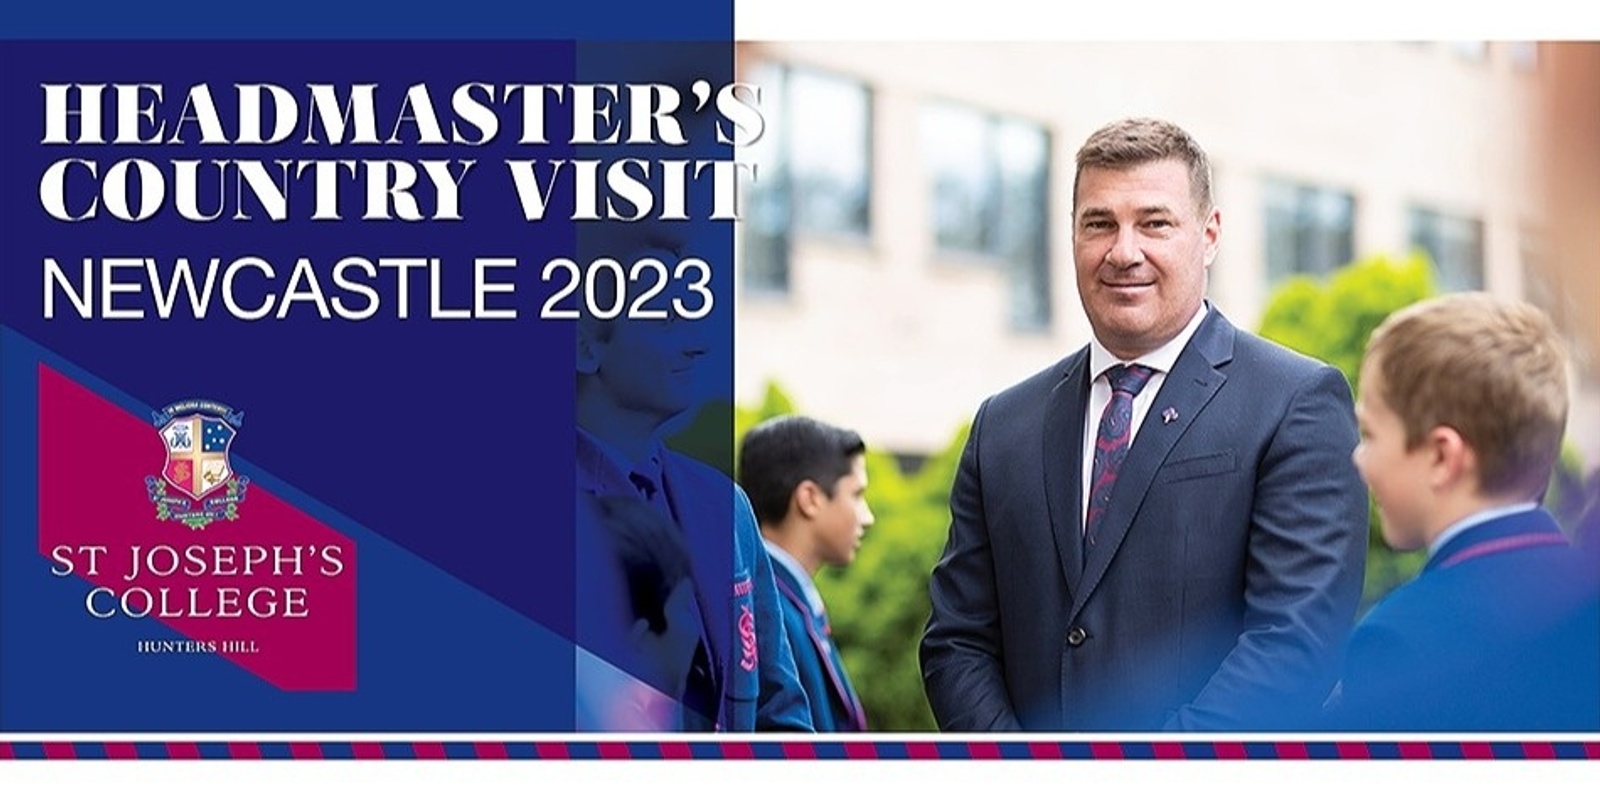 Banner image for Newcastle Headmaster's Country Visit